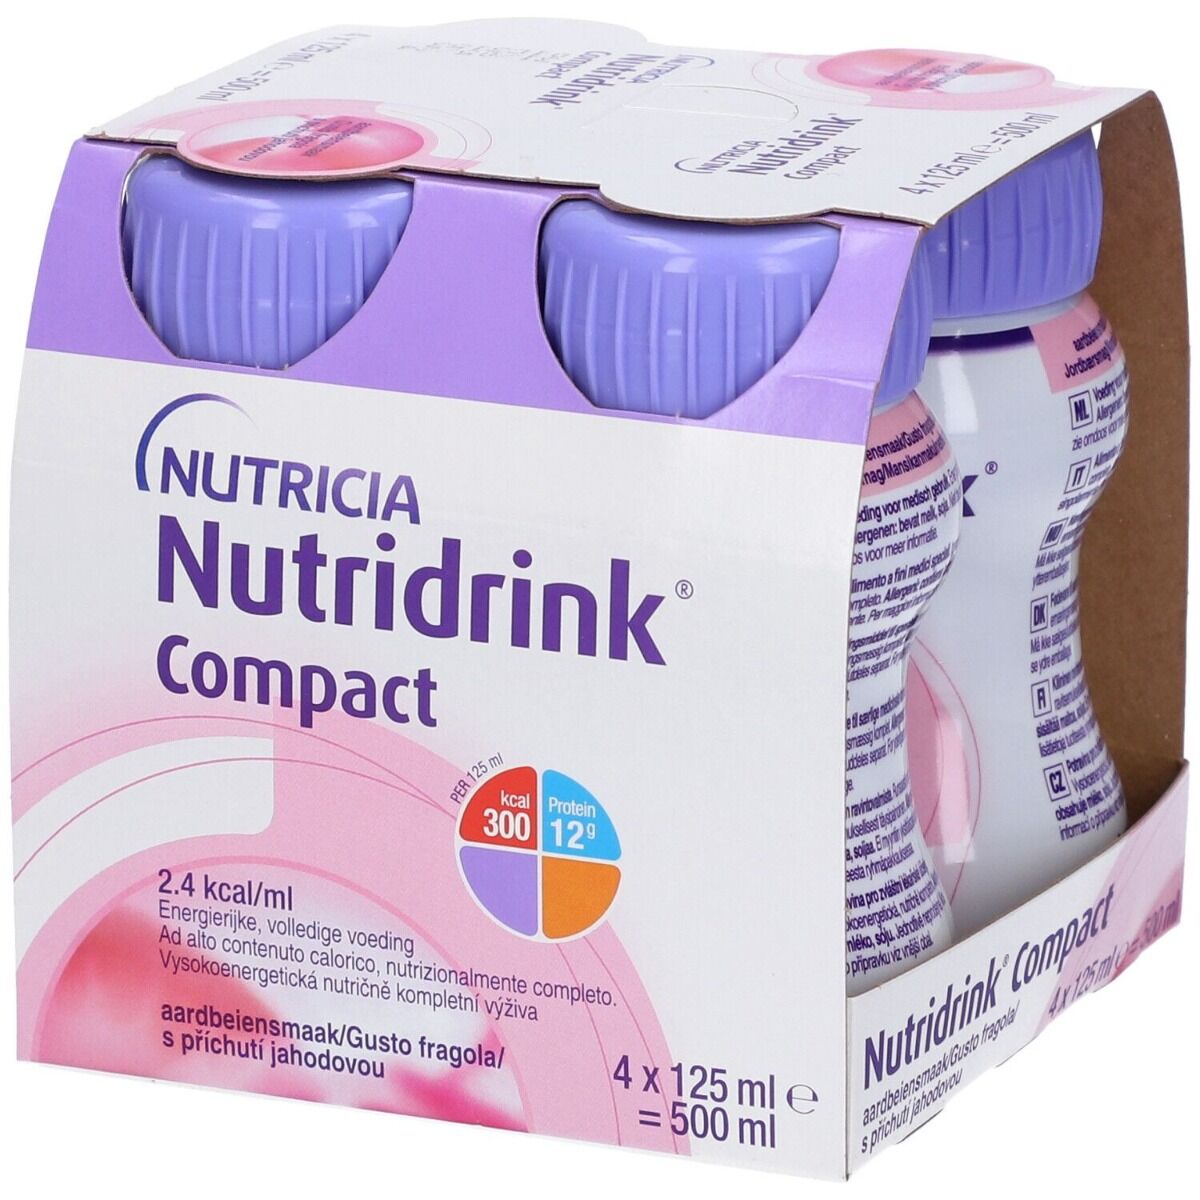 nutridrink Compact Integratore Nutrizionale Gusto Fragola 4x125 ml